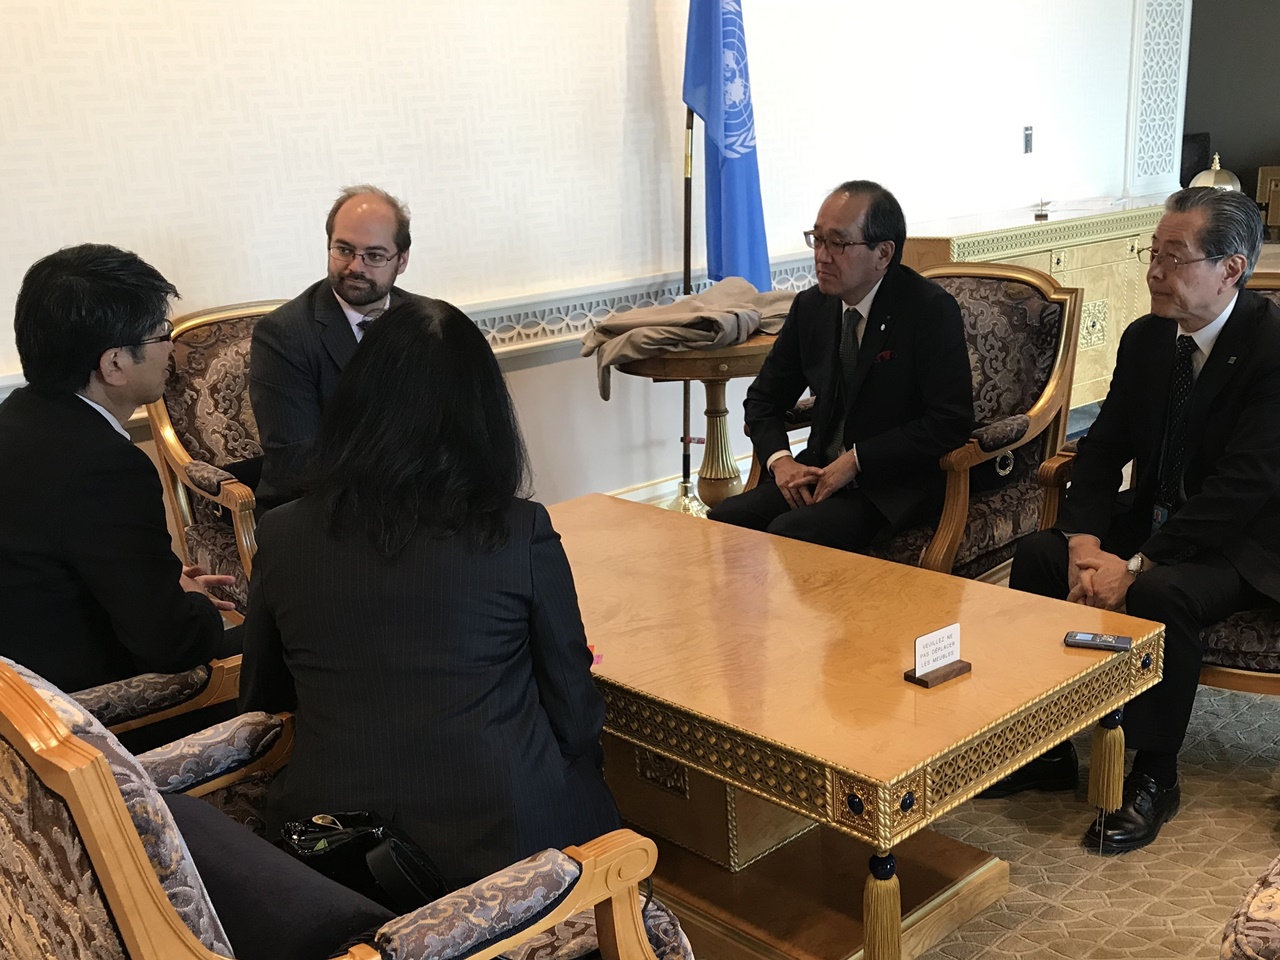 Meeting with UK Ambassador and Permanent Representative to the Conference on Disarmament 